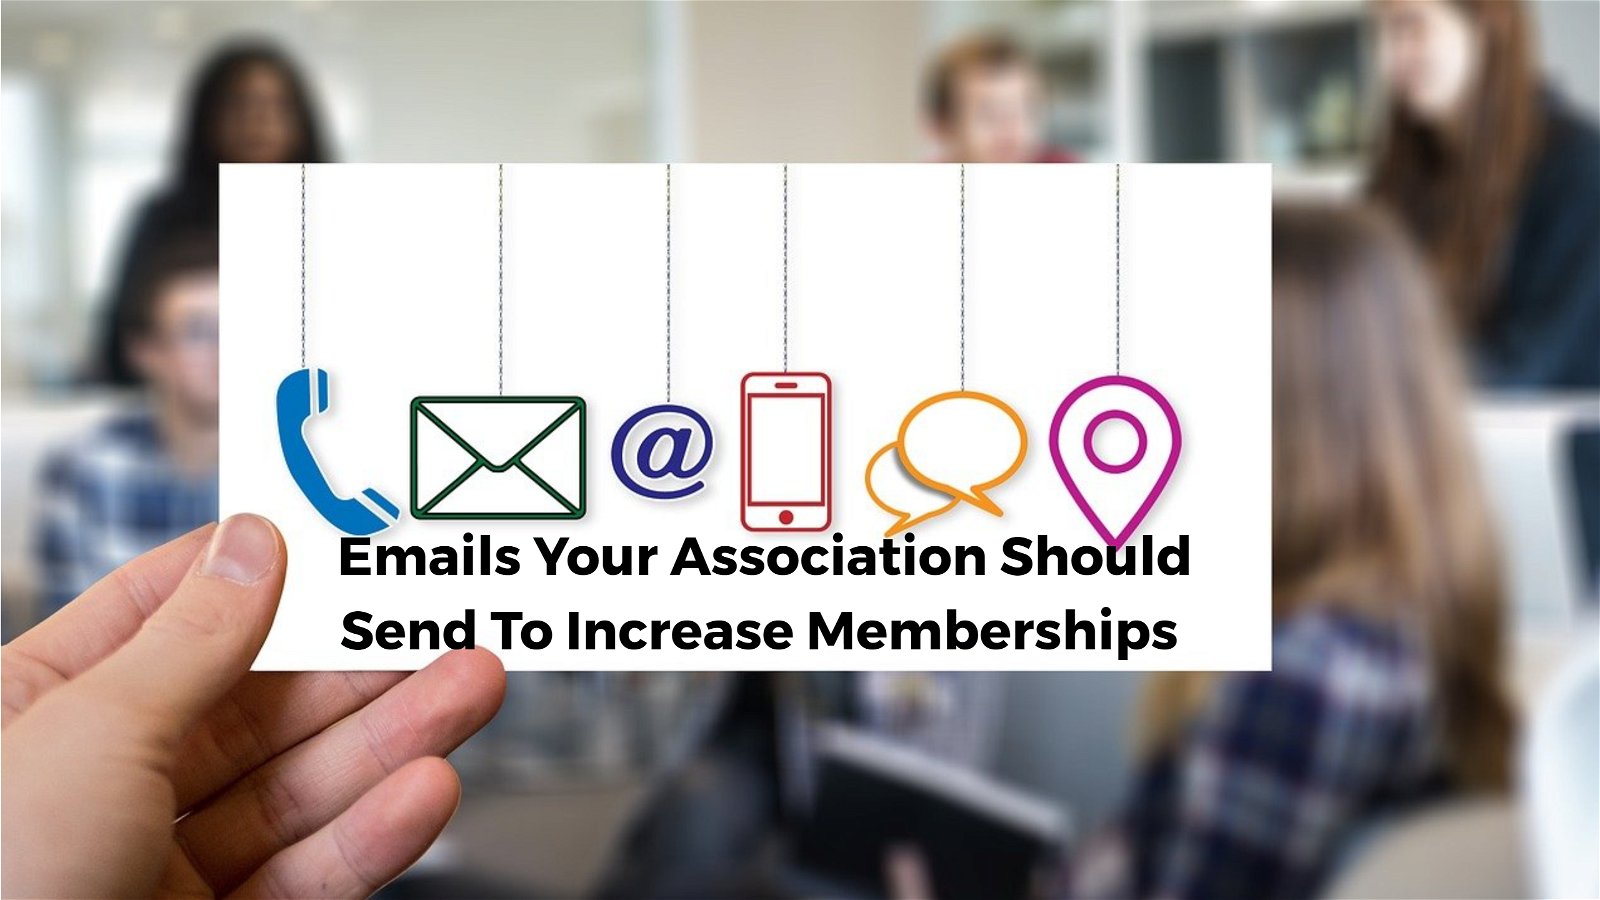 Emails Your Association Should Send To Increase Memberships